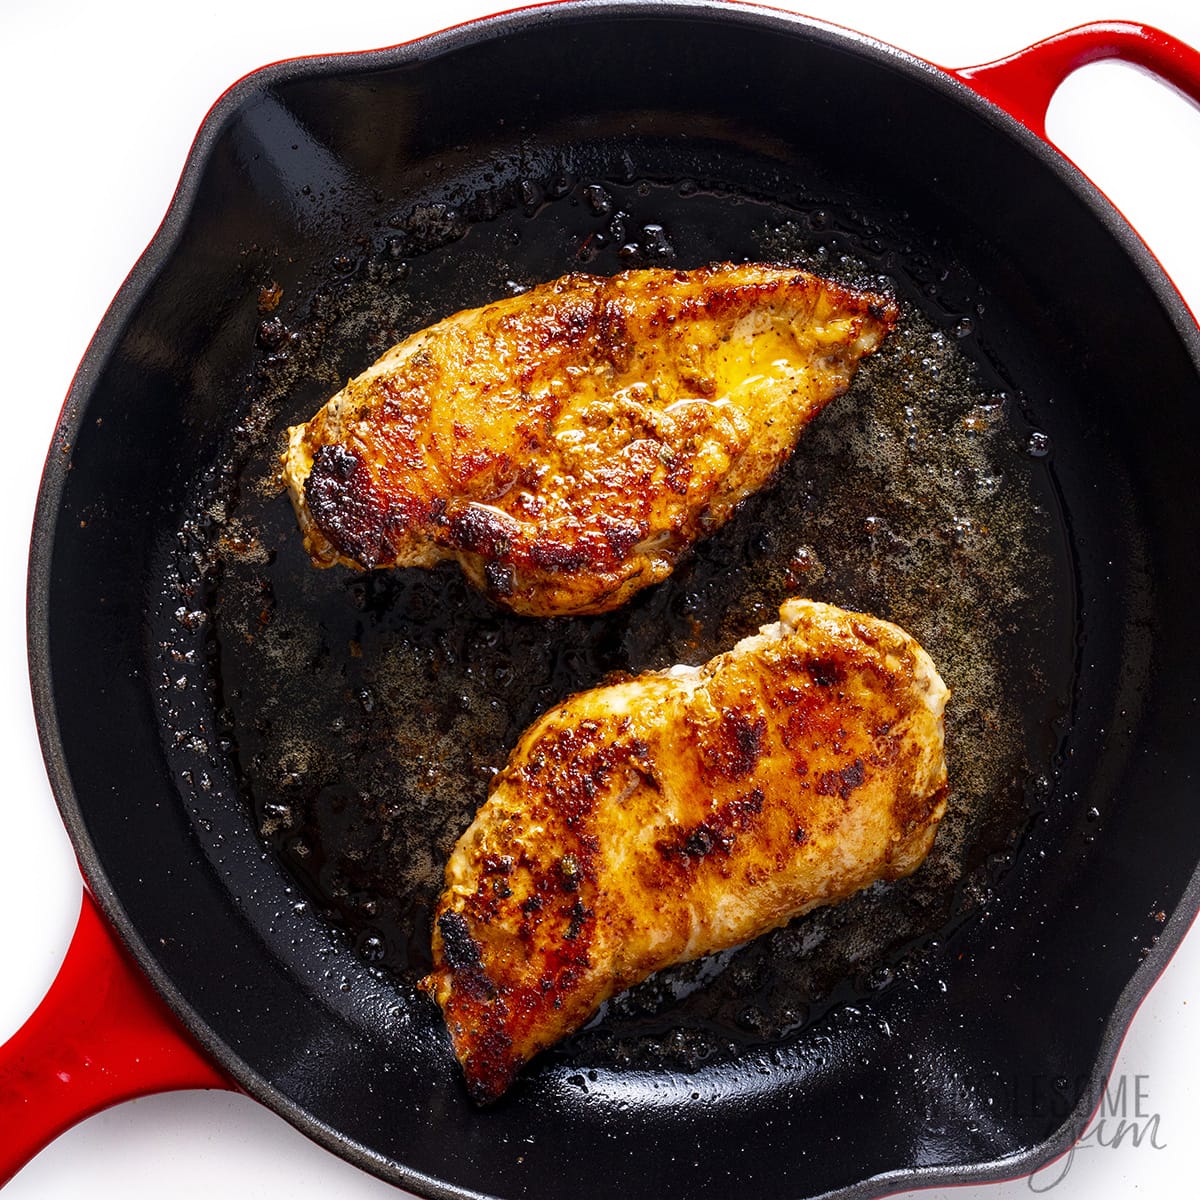 Seared chicken in a skillet.